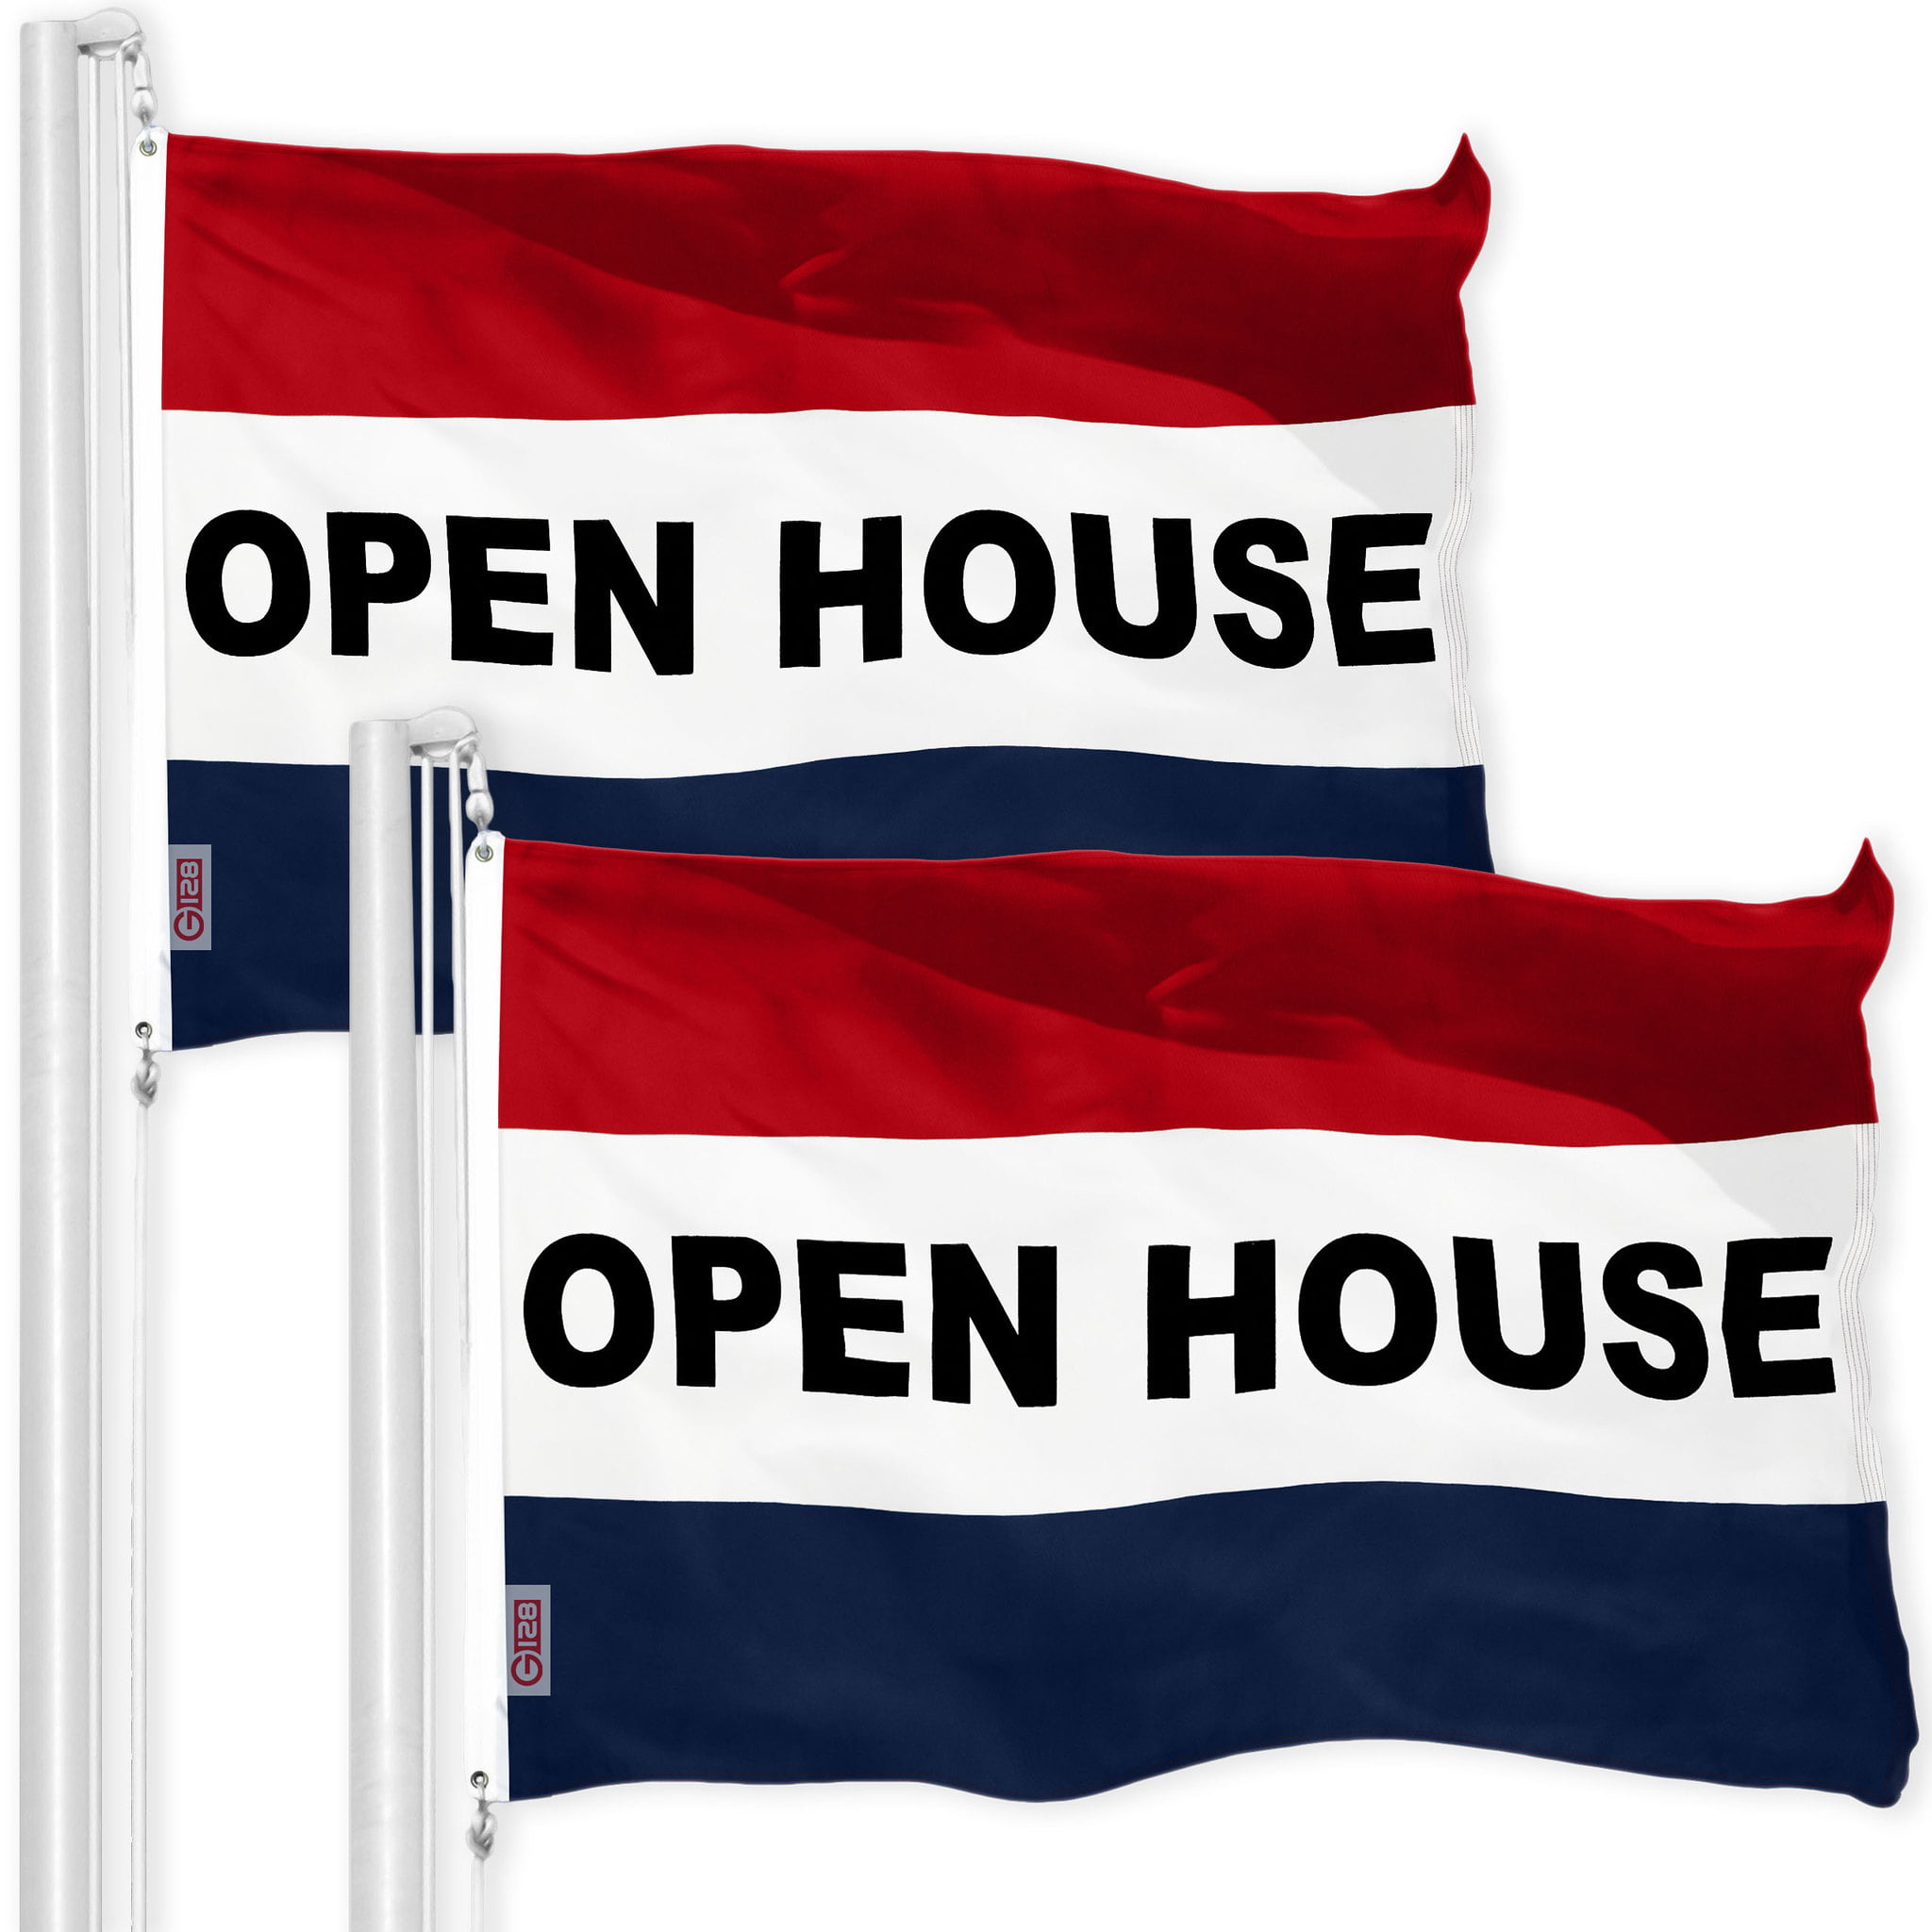 2x3 DELI SANDWICHES Red White & Blue Banner Sign NEW Discount Size & Price 